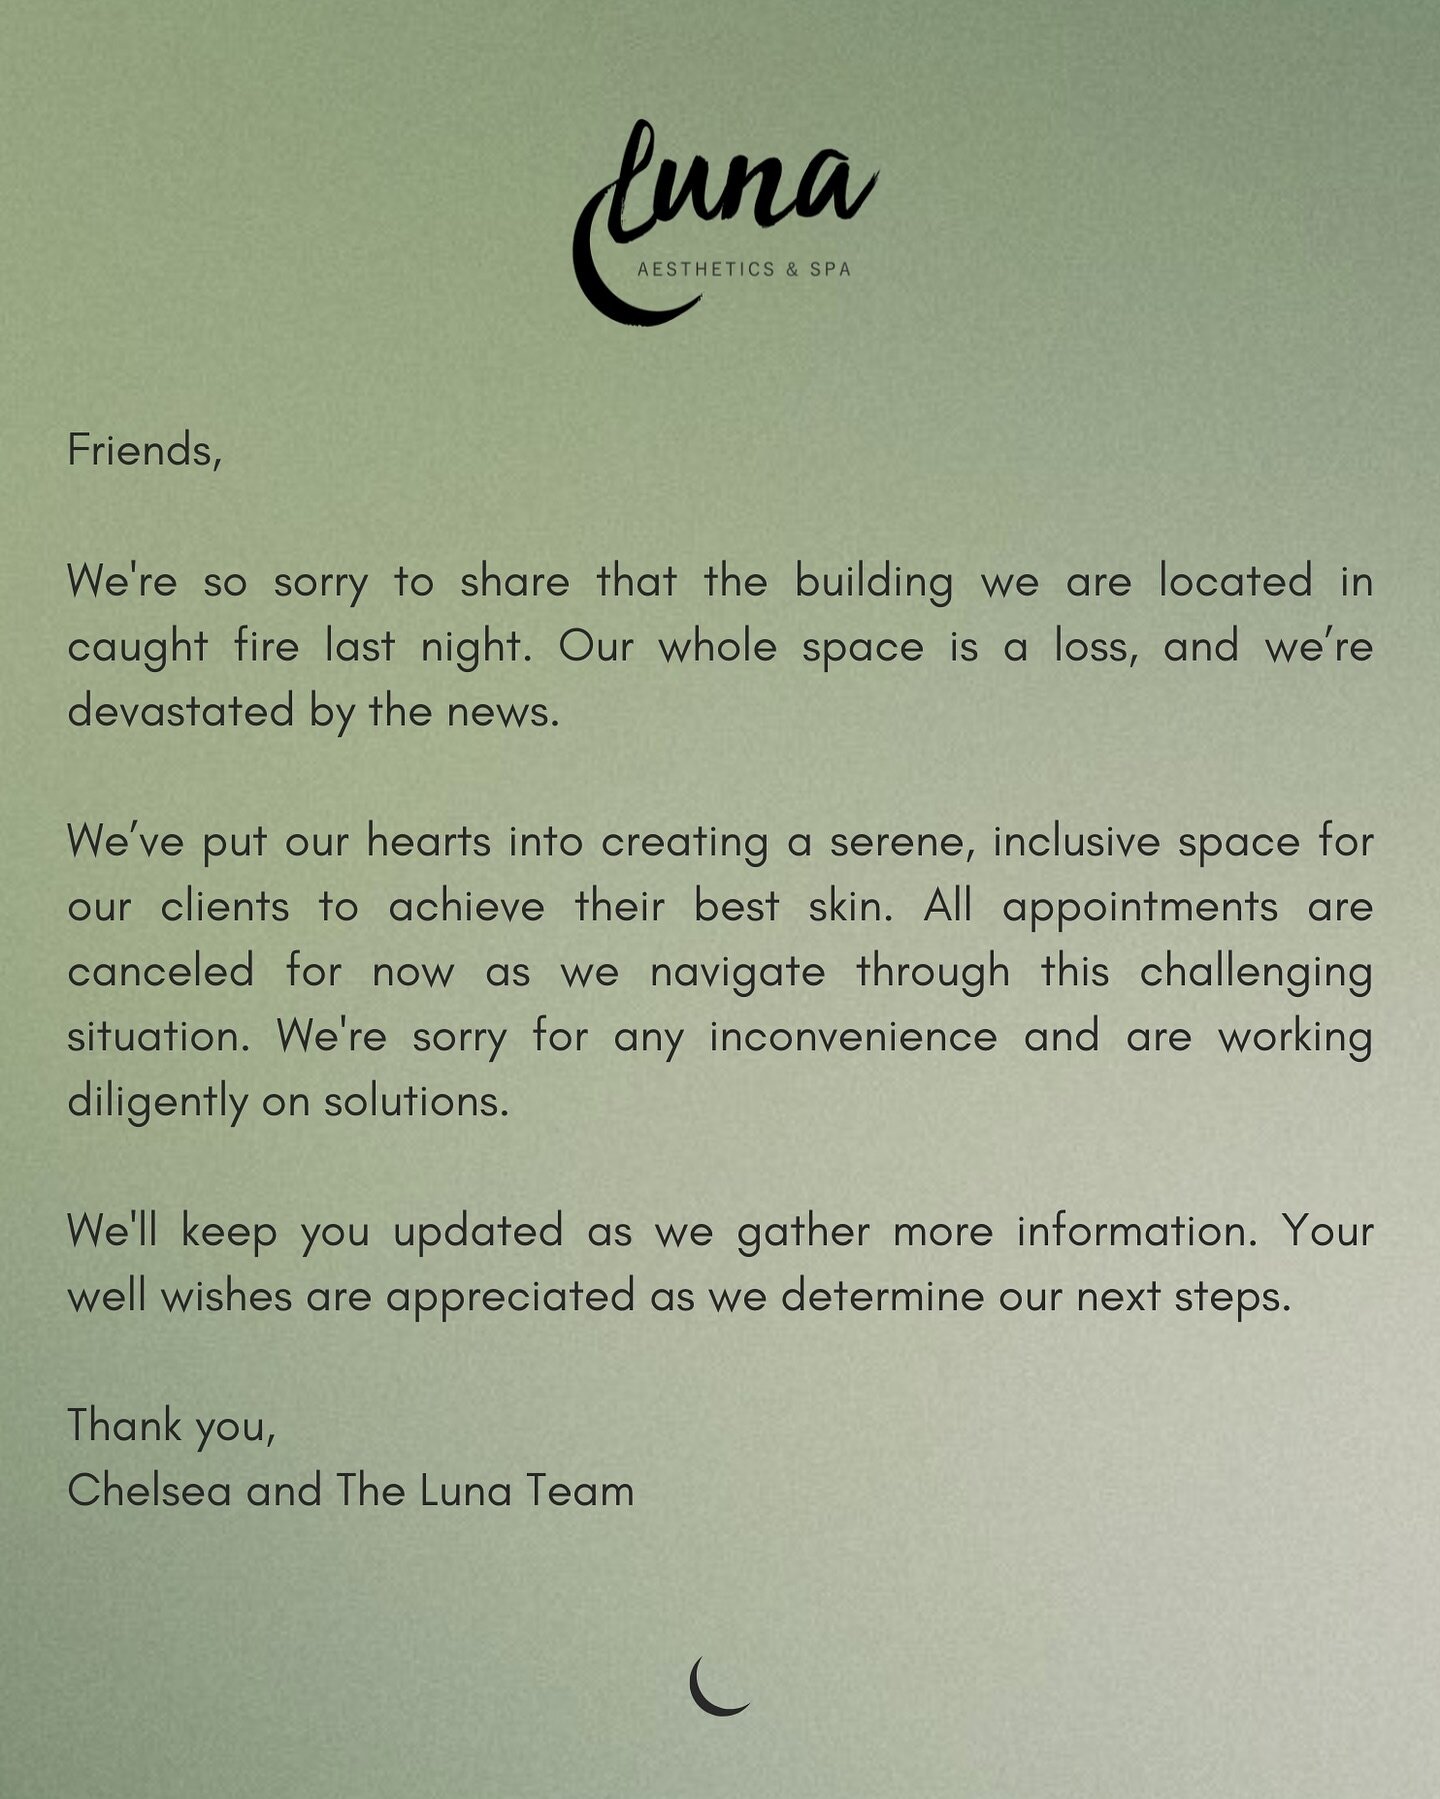 We&rsquo;re incredibly sad to share this news. Thank you for your patience and well wishes as we determine our next steps. Please feel free to email us at info@lunaskinrva.com with any questions. More information to come 🤍